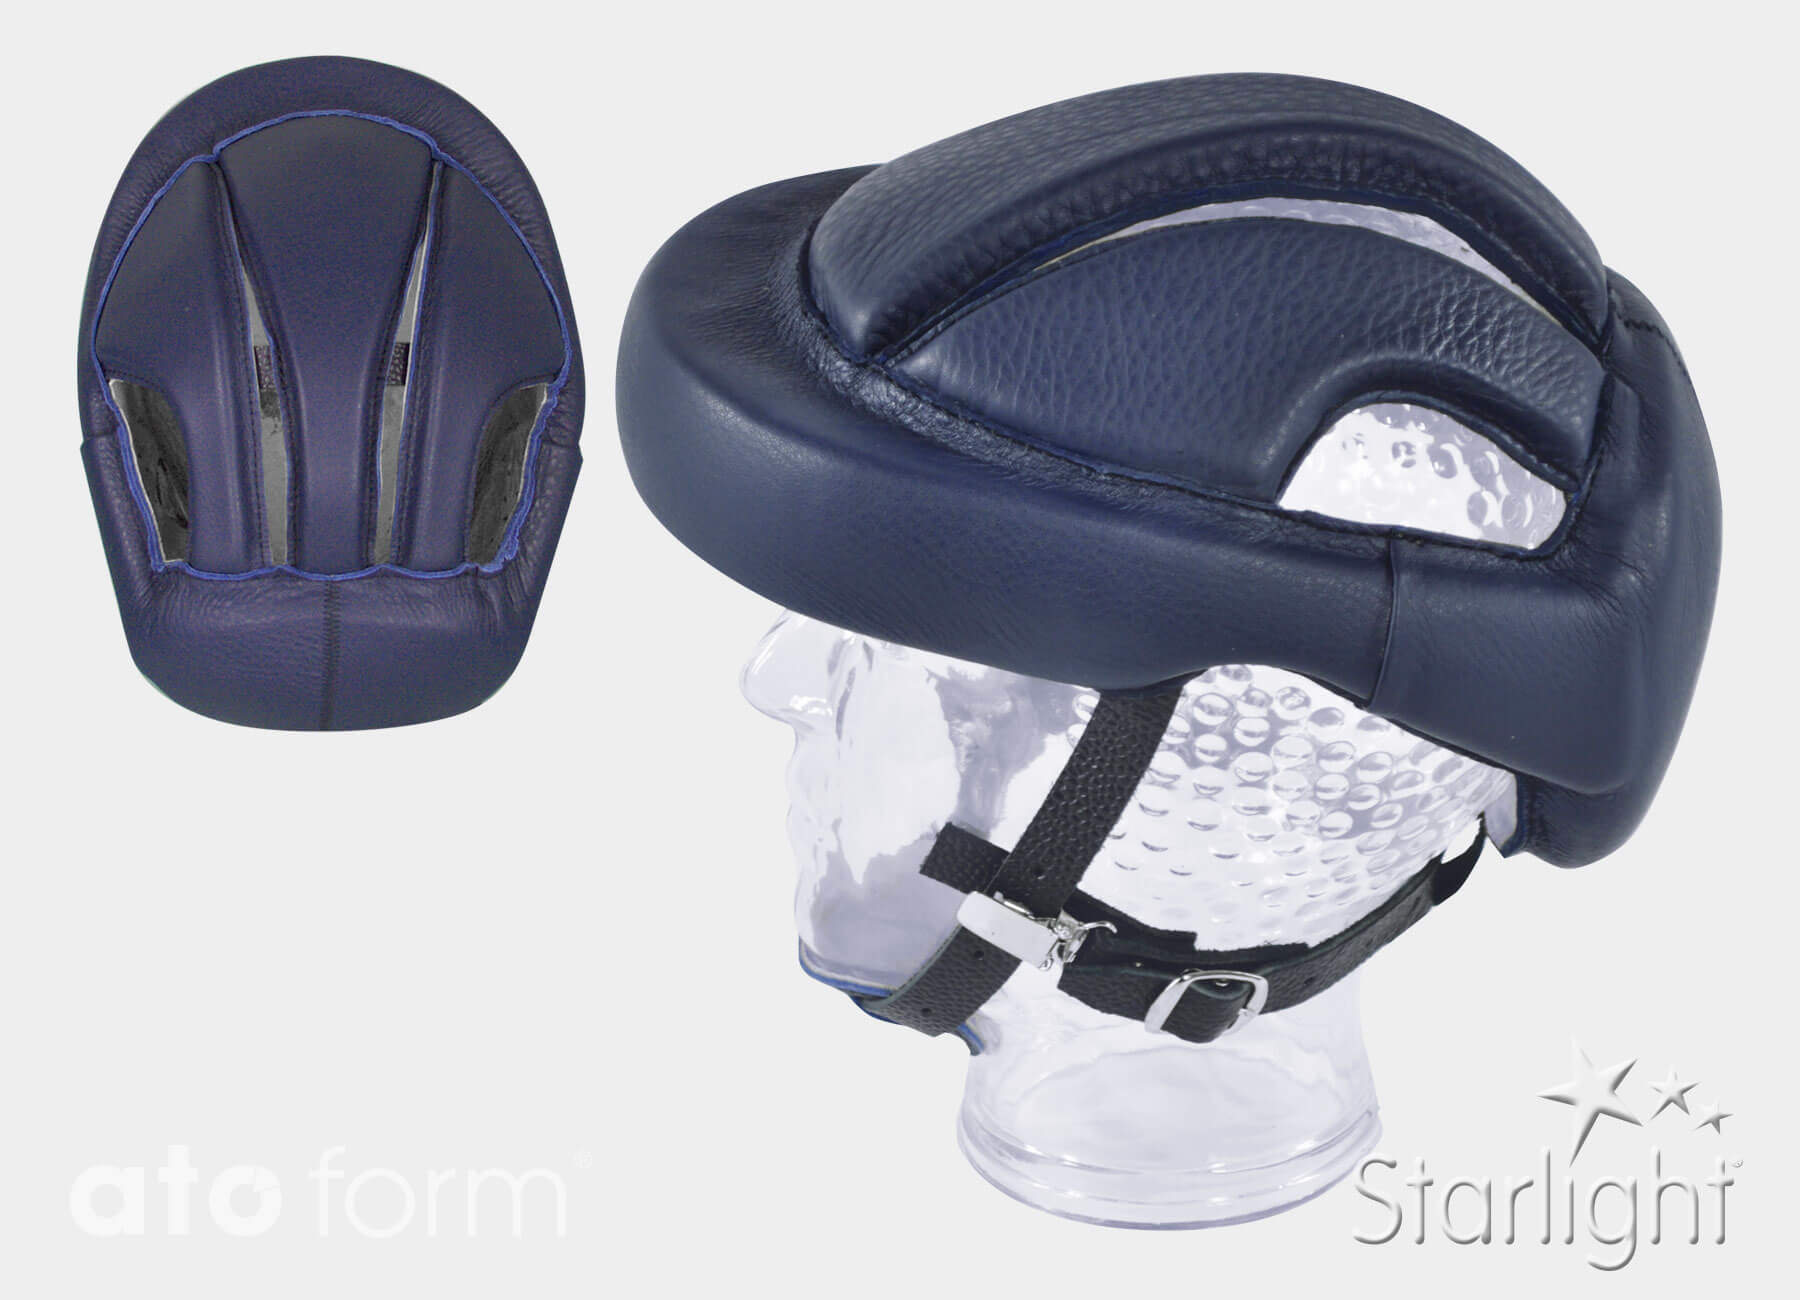 Starlight Protect Plus with extra upper haed braces